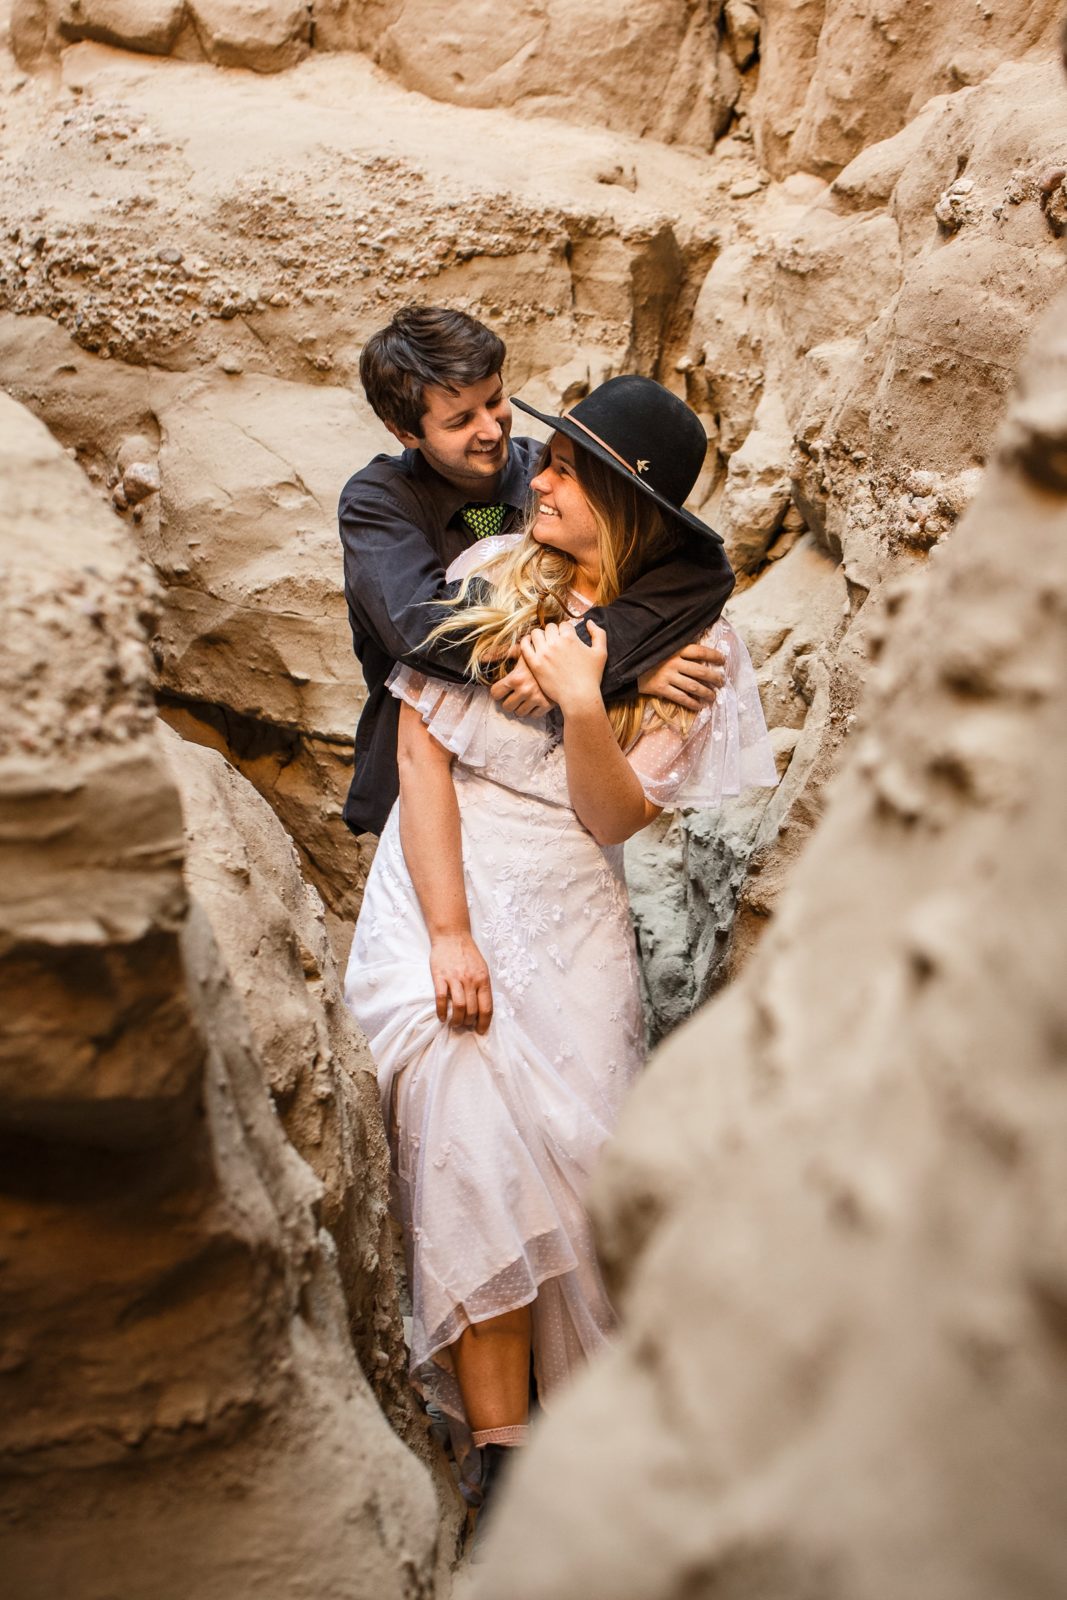 Two eloping partners embrace during their outdoor hiking adventure slot canyon elopement near Mecca Hills California.